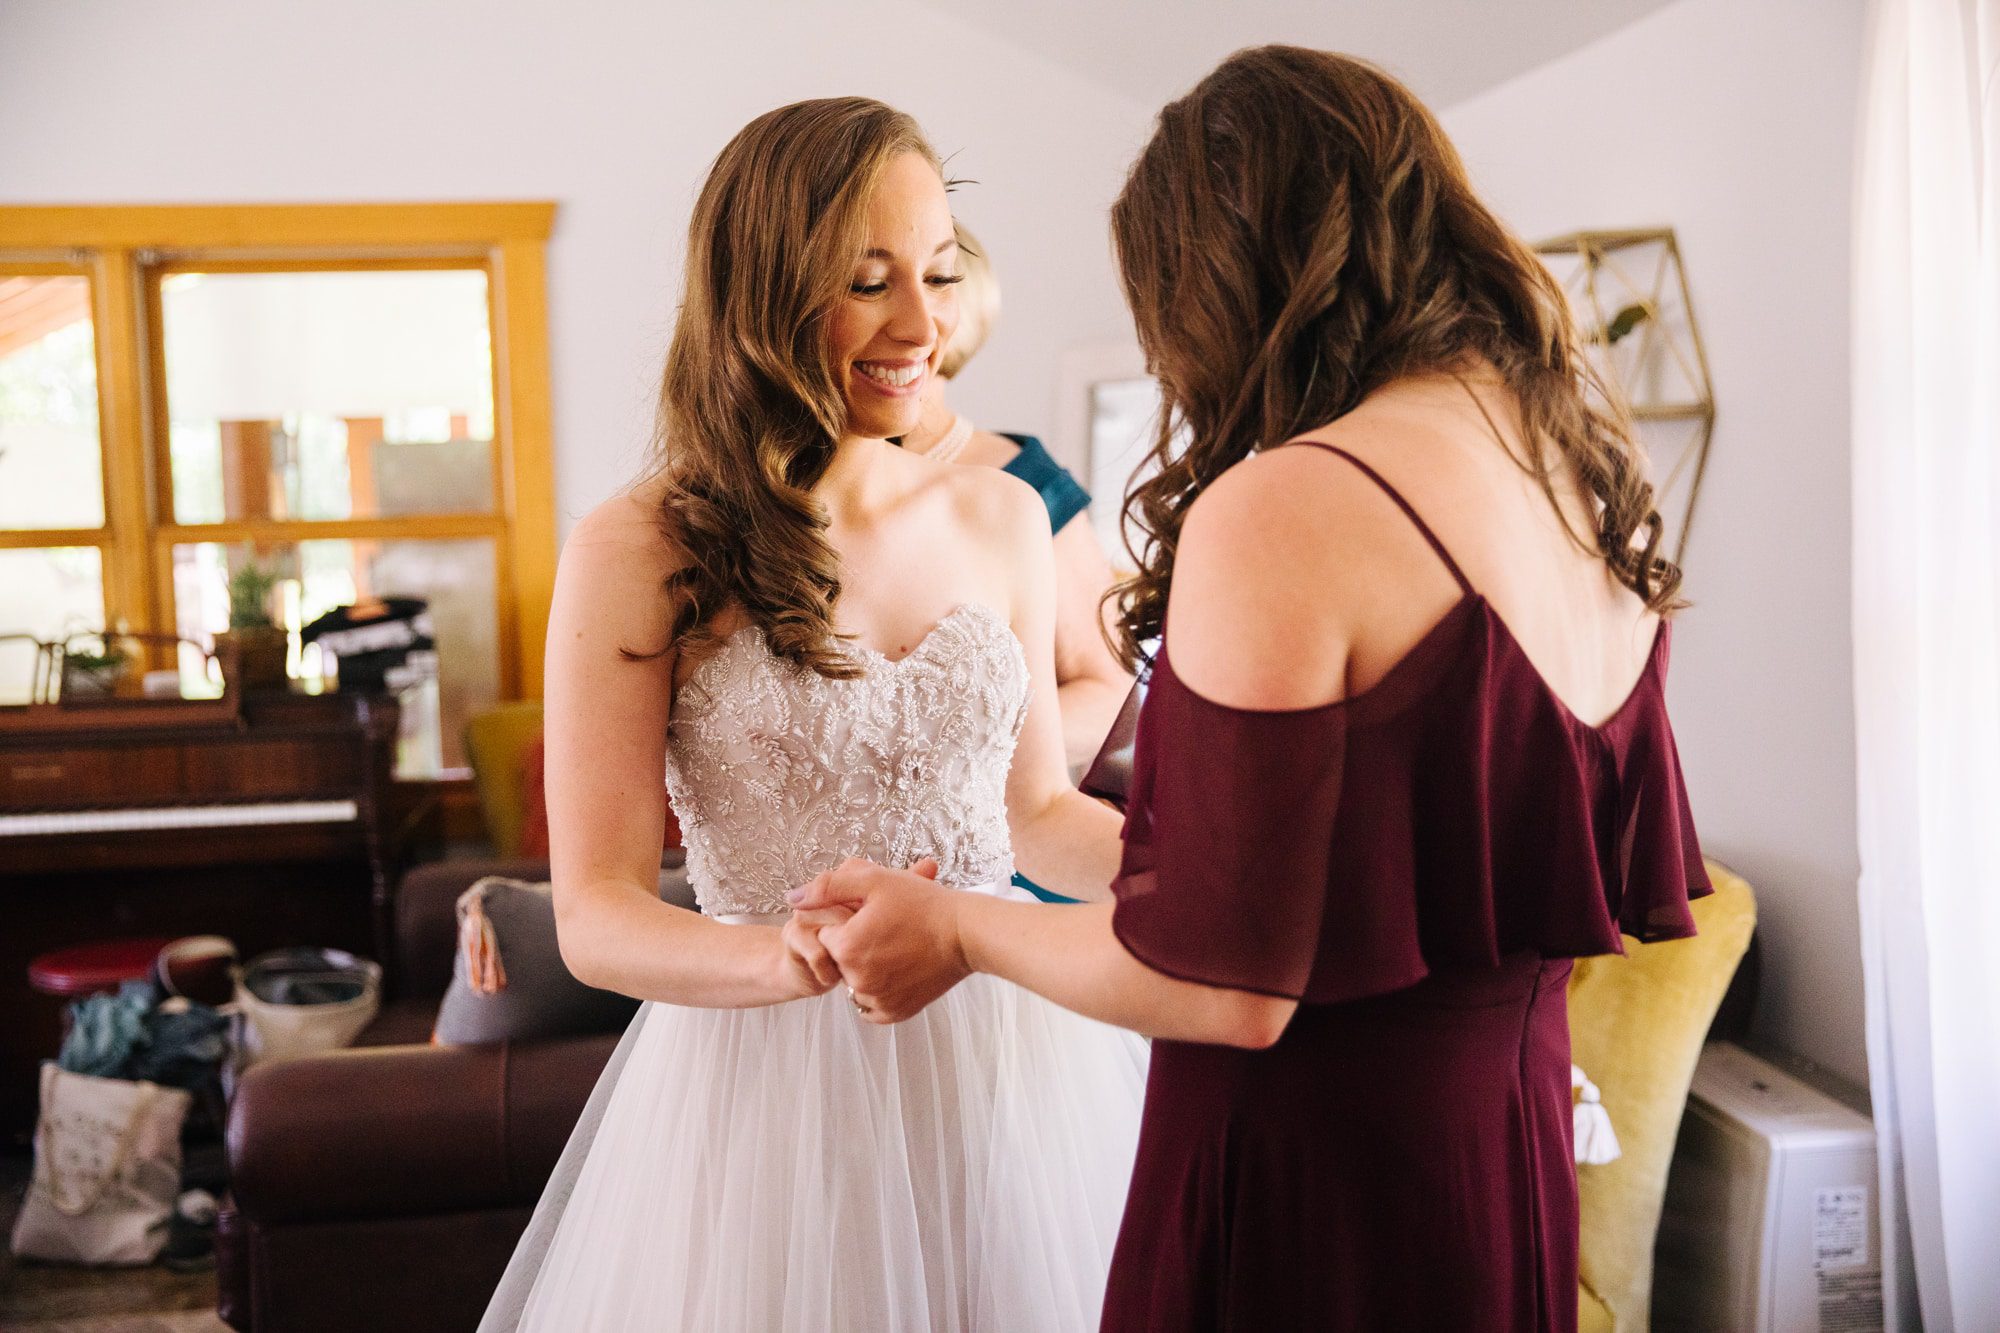 bride with sister, sister as maid of honor, bride getting ready with sister, bride getting ready